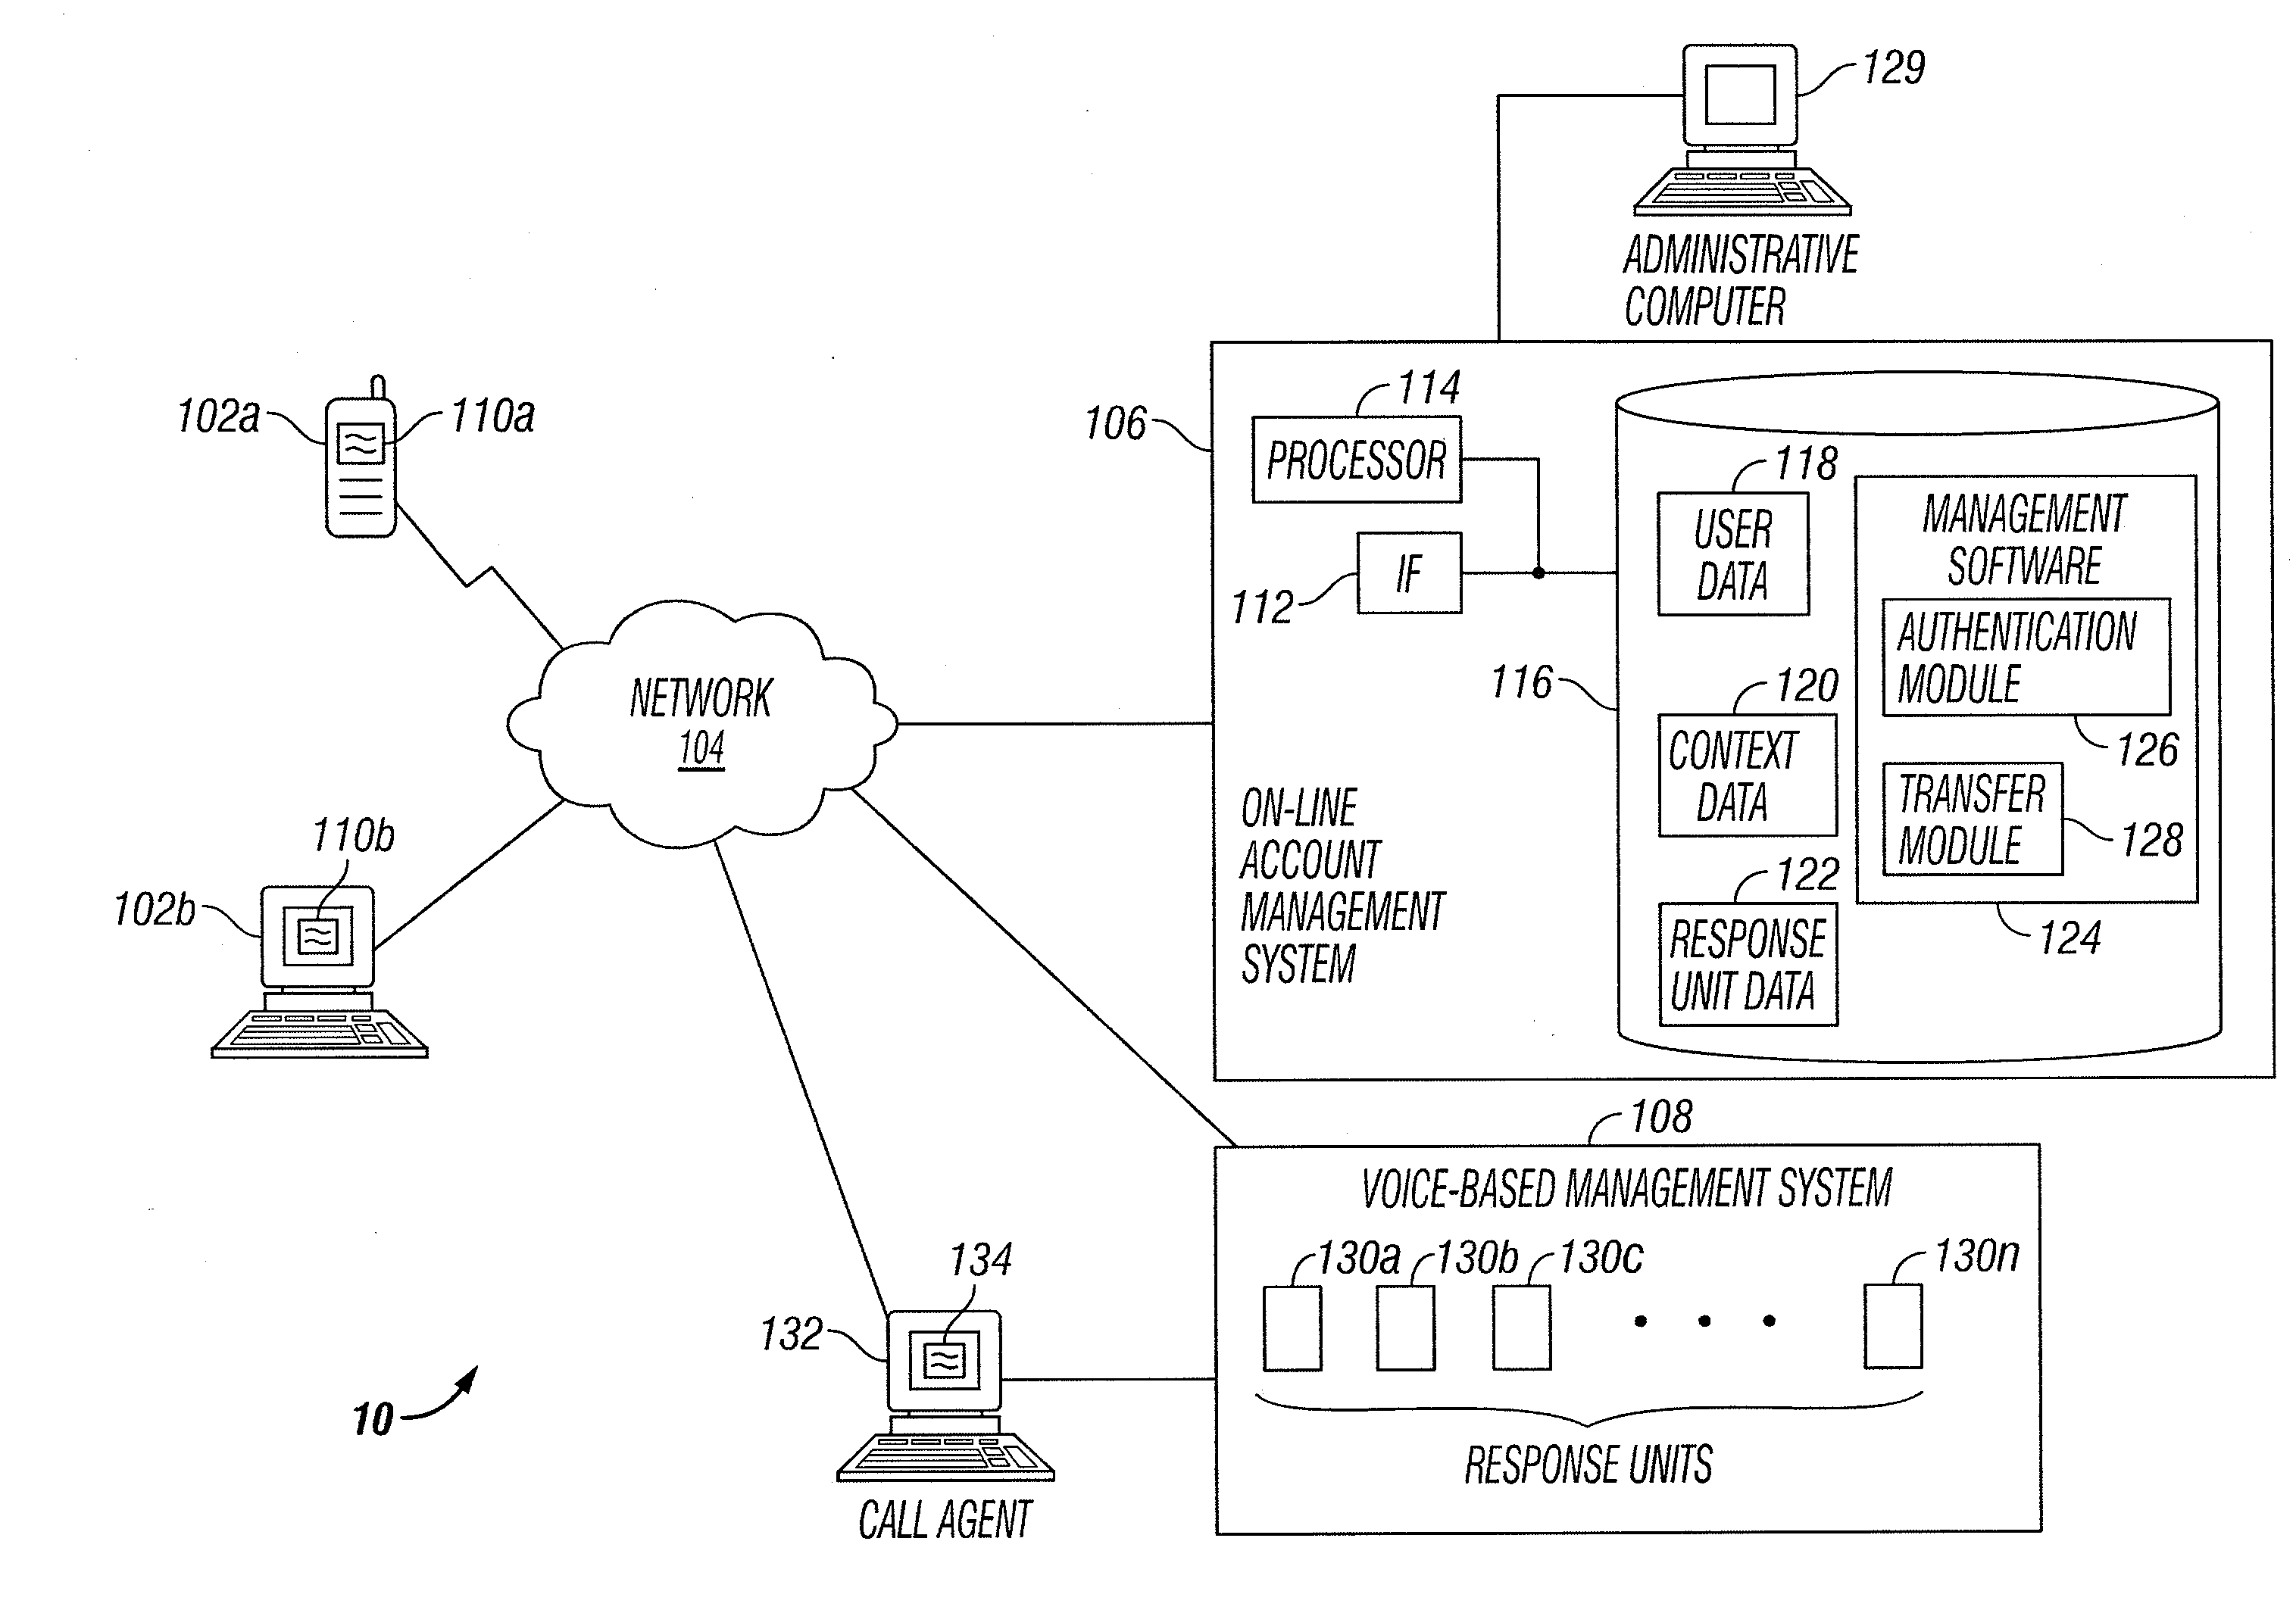 Communication with a Voice-Based Account Management System